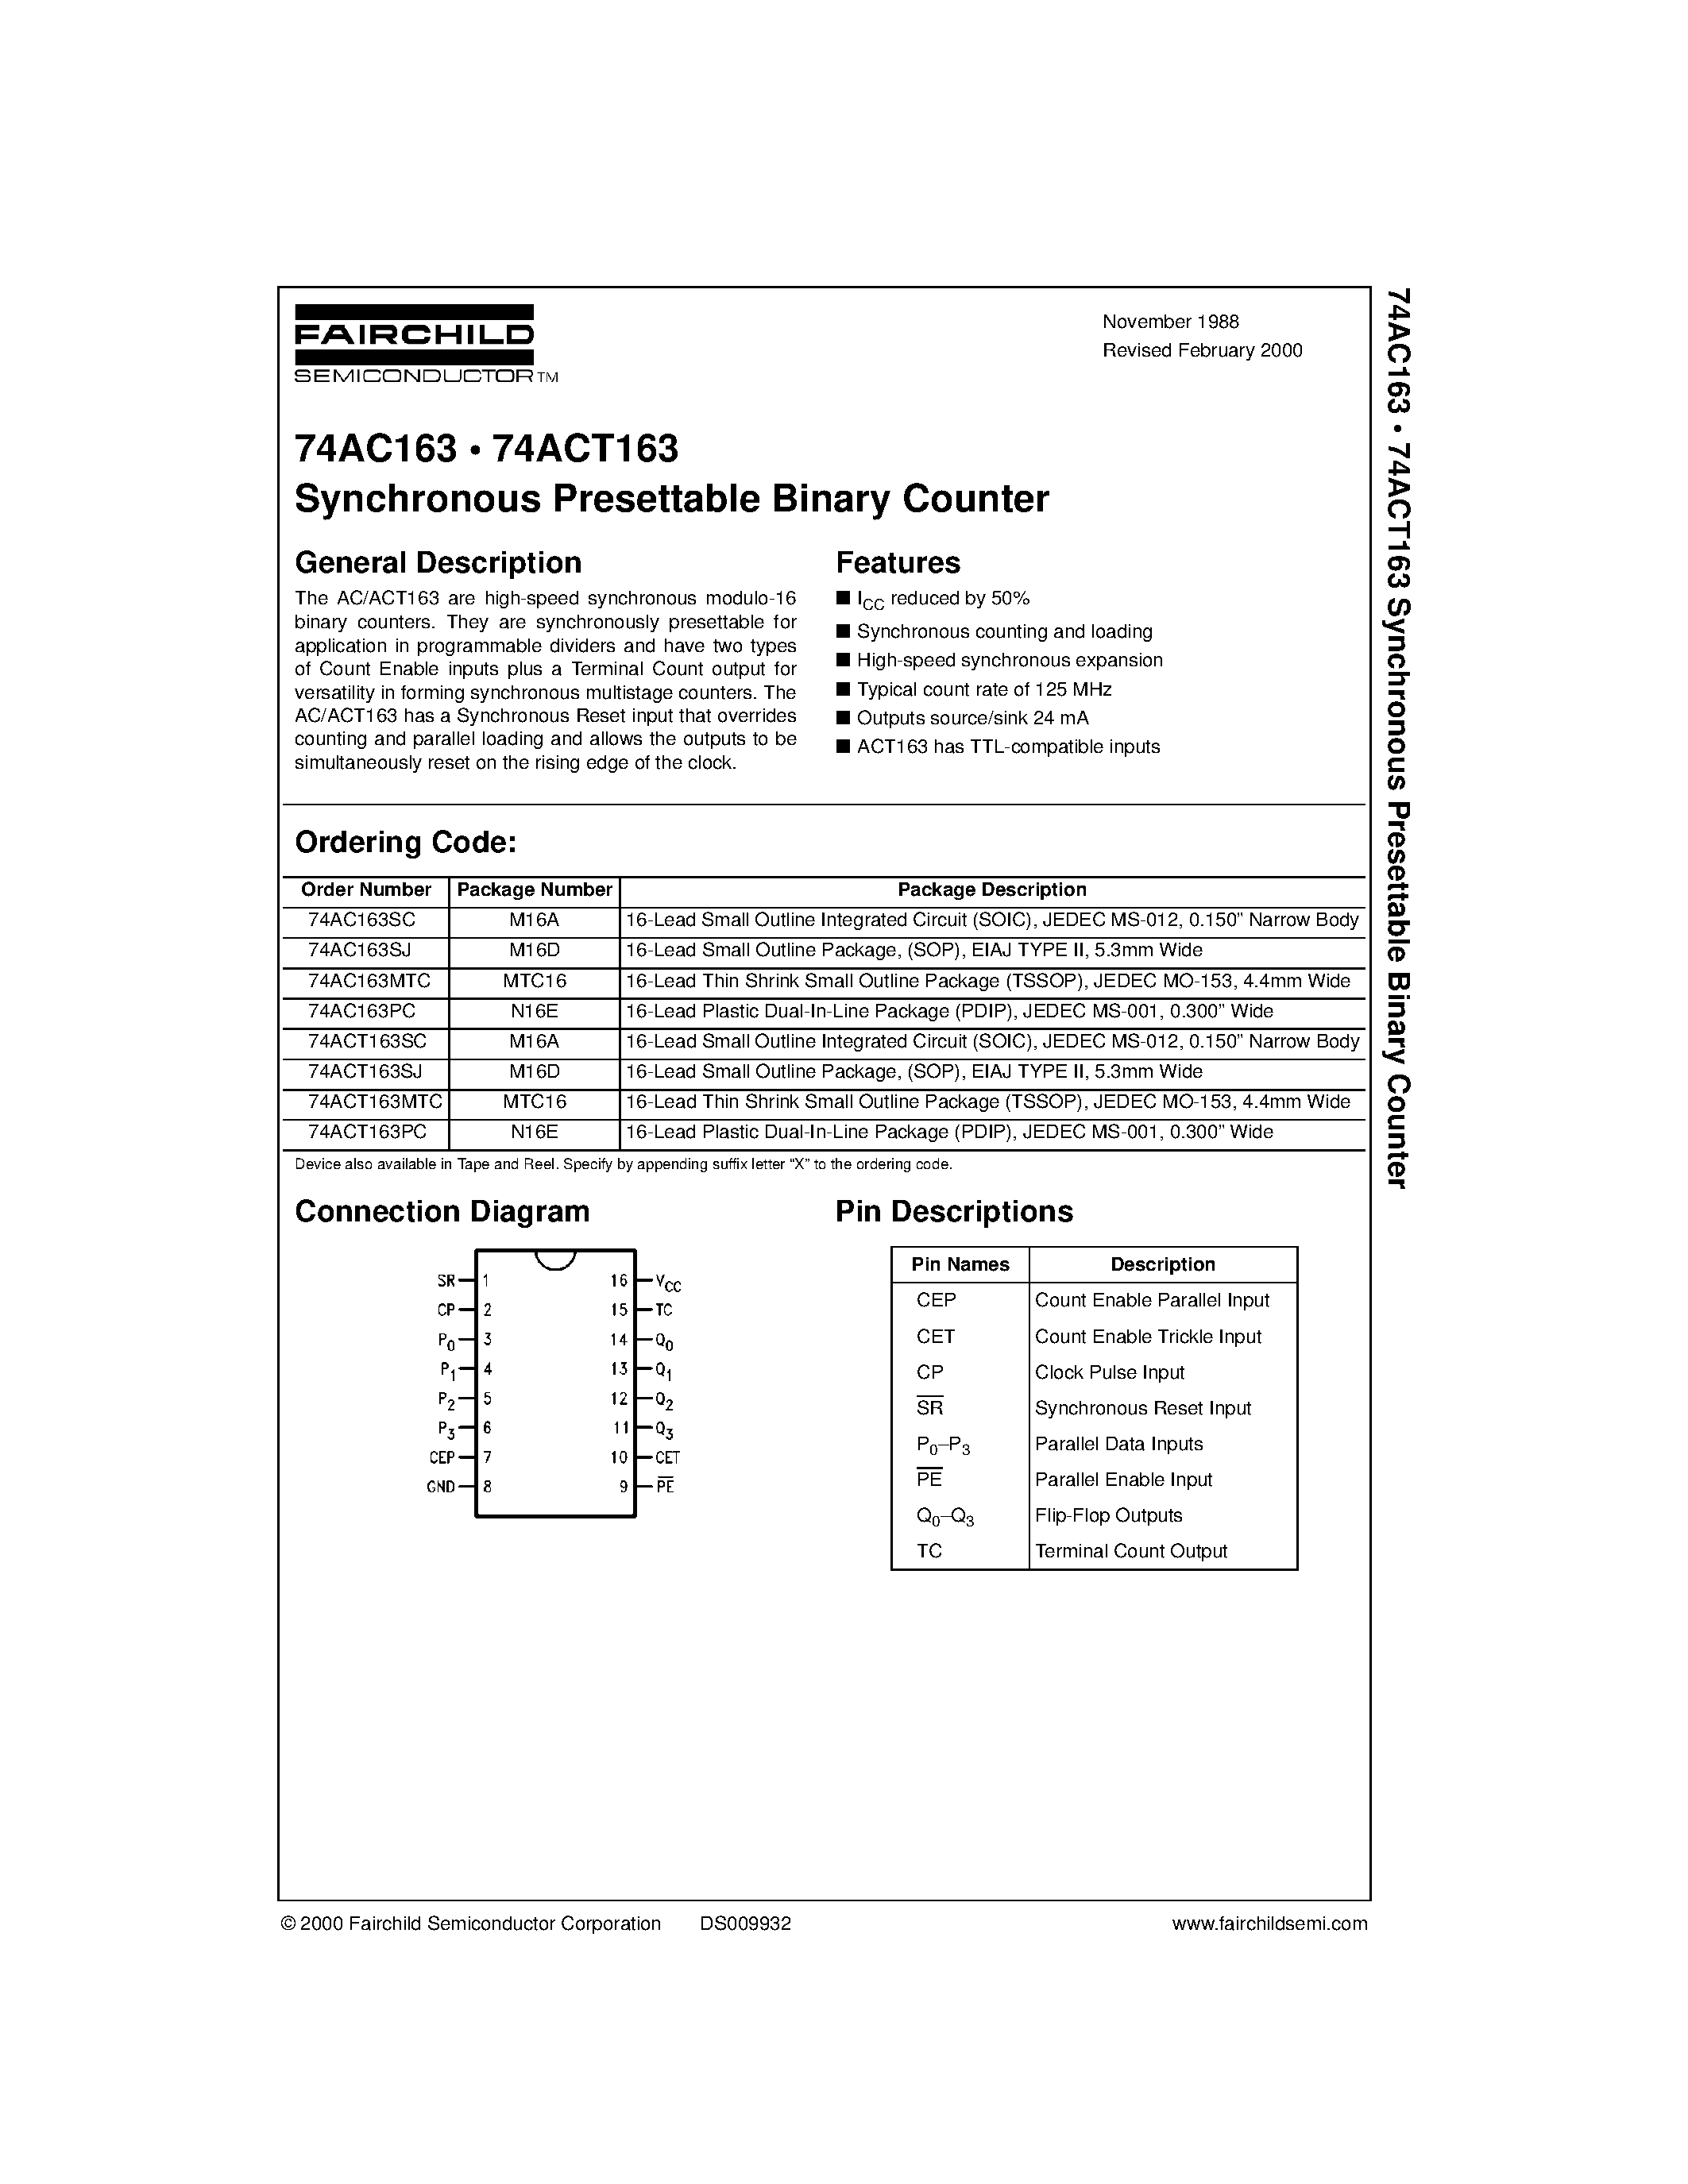 Datasheet 74AC163SC - Synchronous Presettable Binary Counter page 1